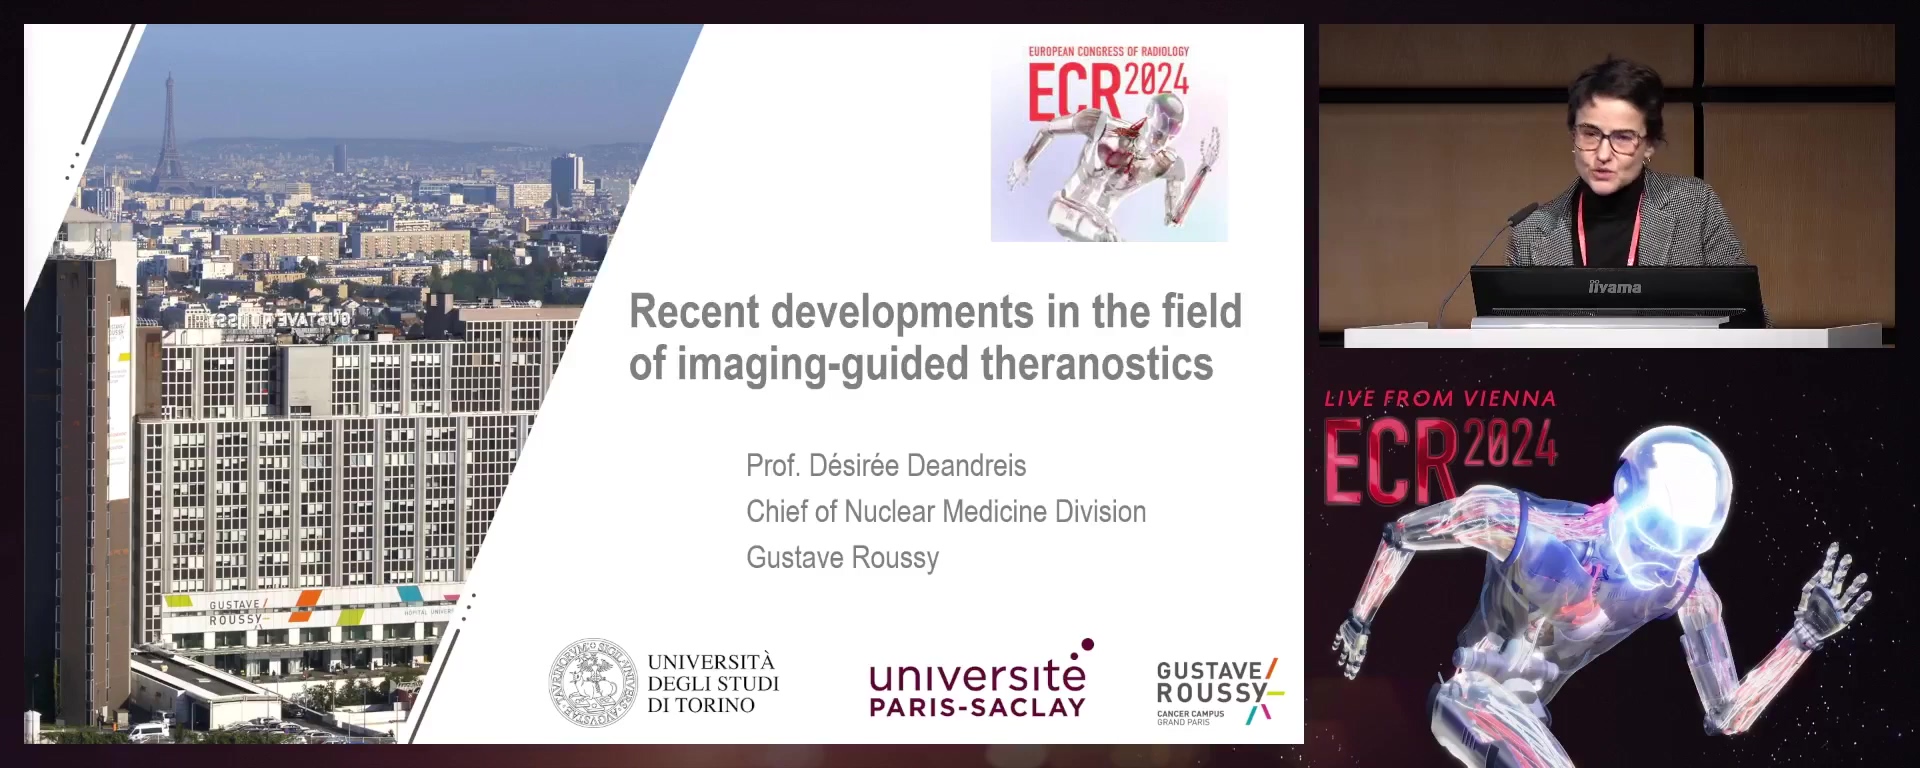 Recent developments in the field of imaging-guided theranostics